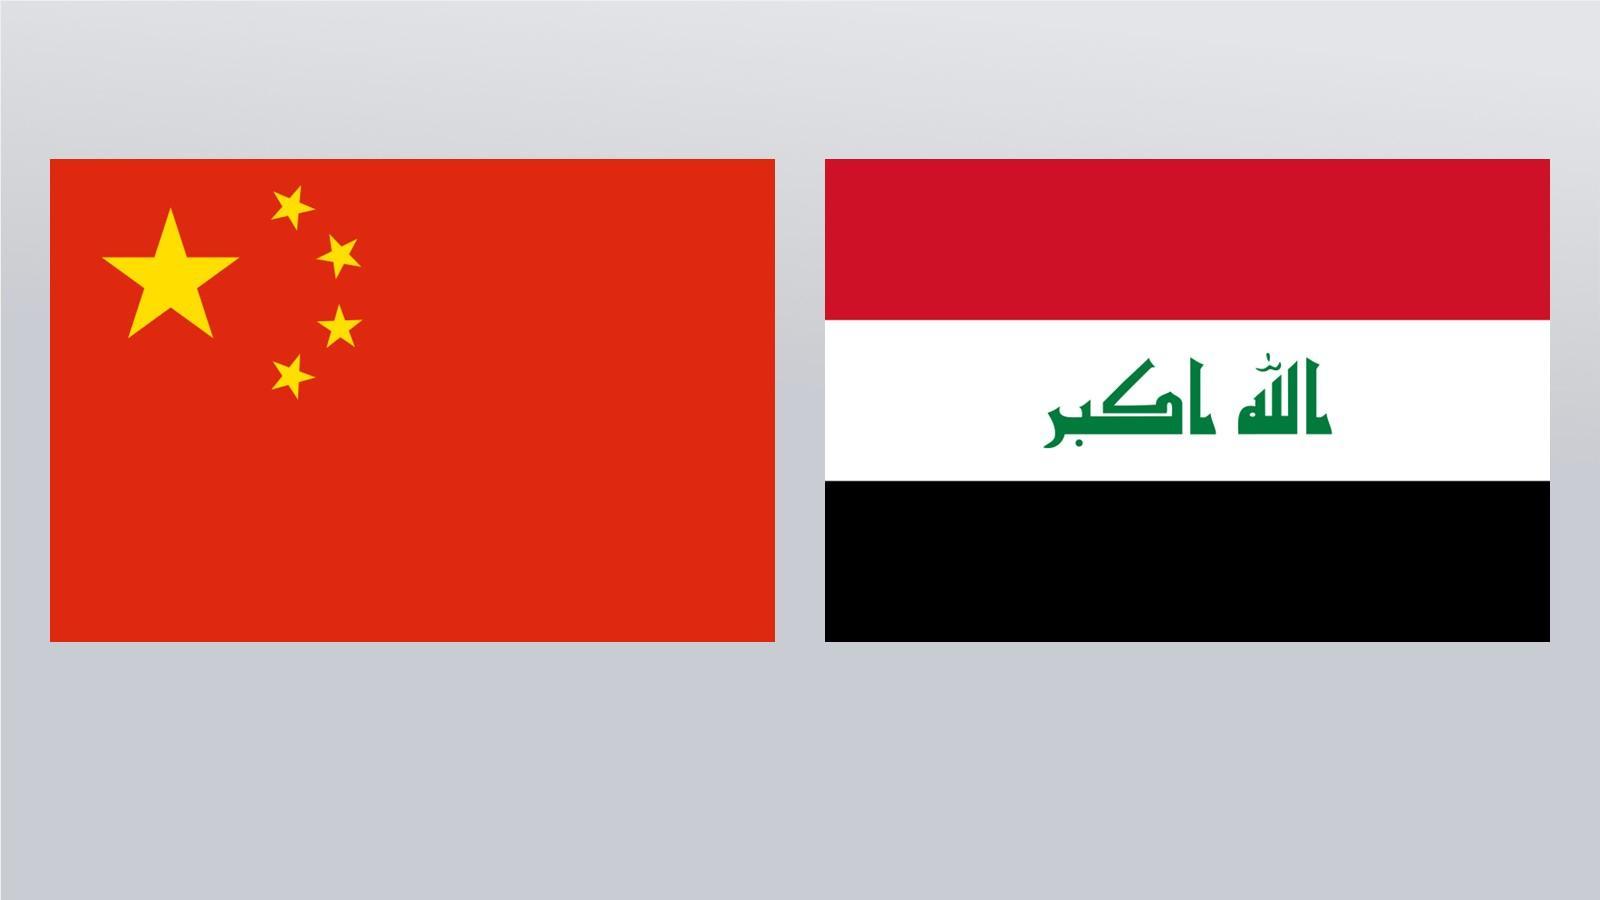 New Data Shows China-Iraq Economic Interdependence Growing in 2022 Amid Robust Crude Oil Trade